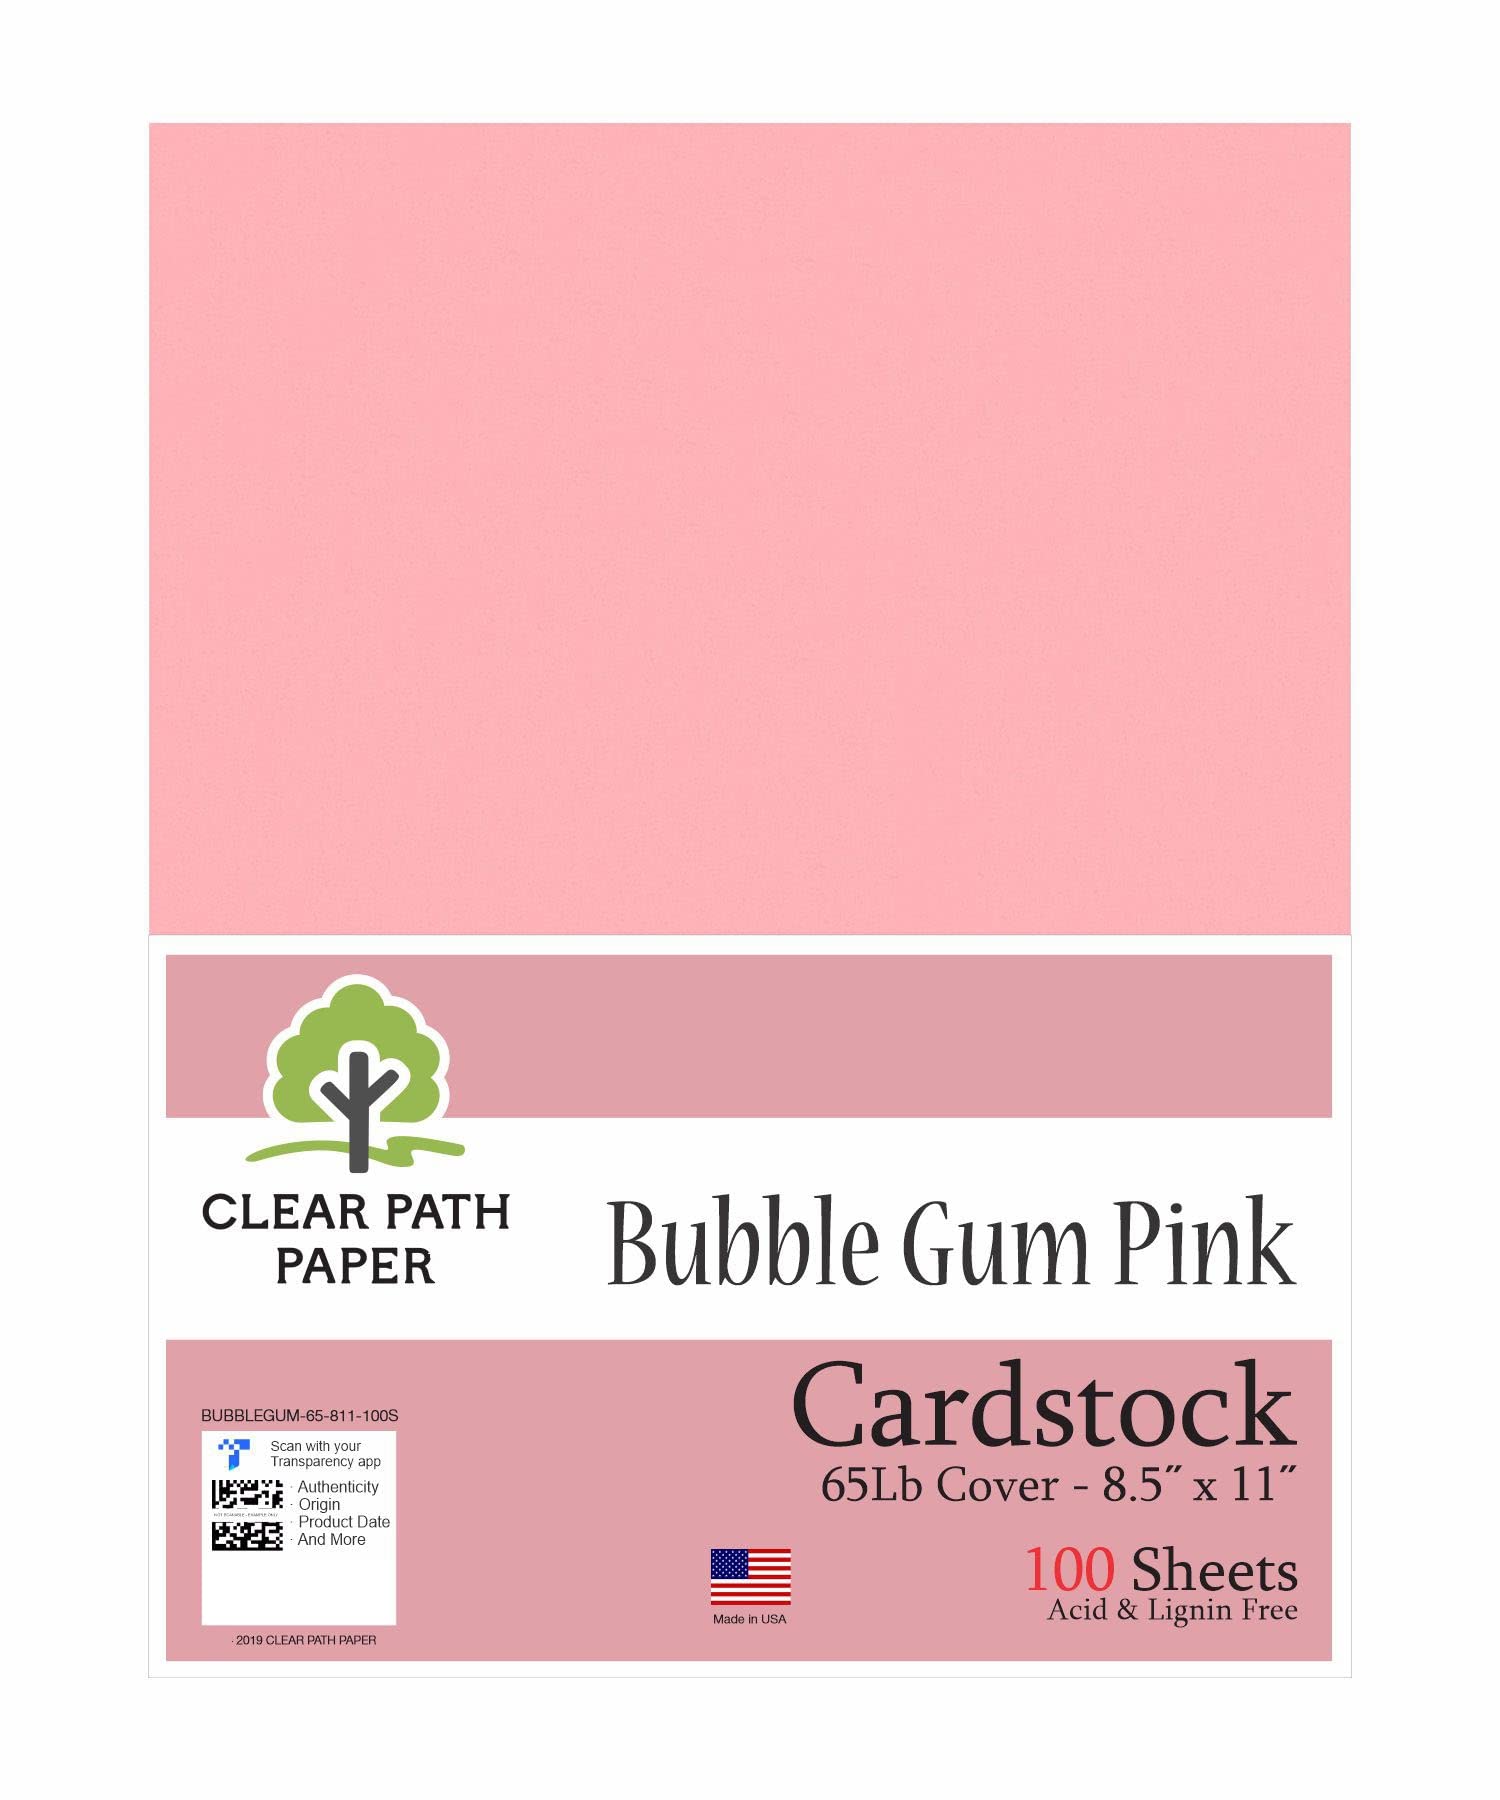 Bubble Gum Pink Cardstock - 85 X 11 Inch - 65Lb Cover - 100 Sheets - Clear  Path Paper